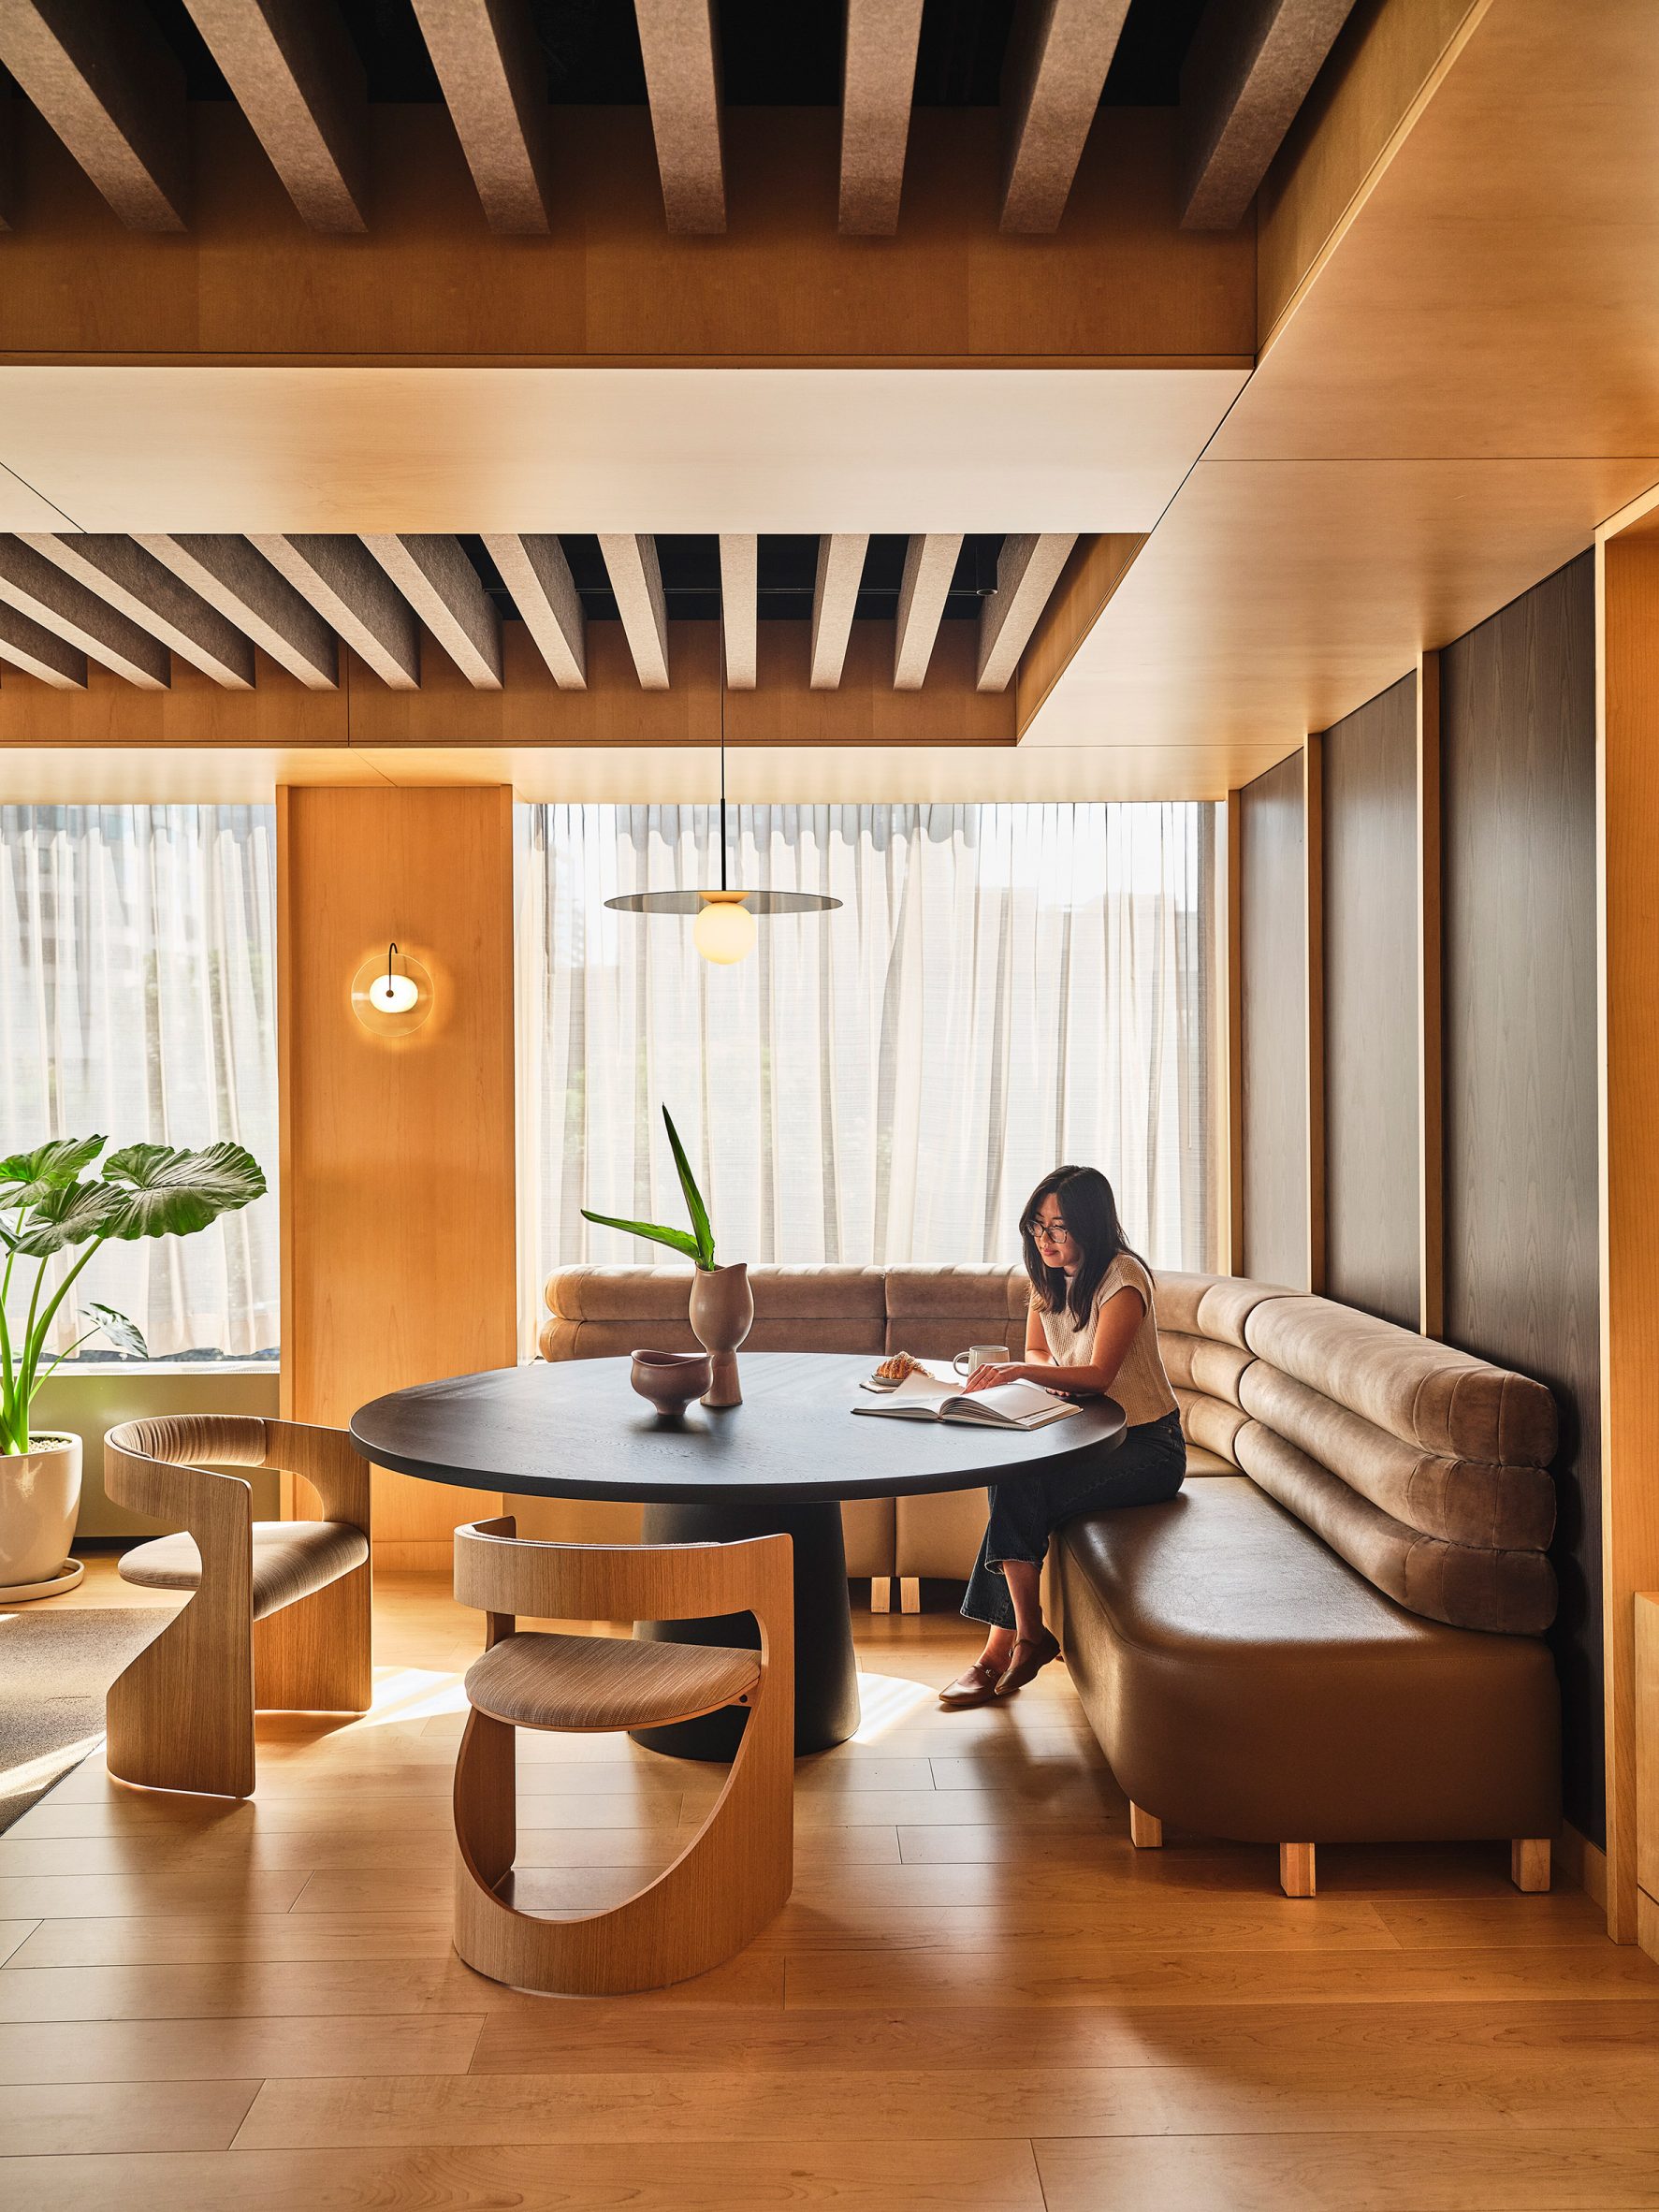 Workspace in the Gensler LA office with a banquette around a black circular table